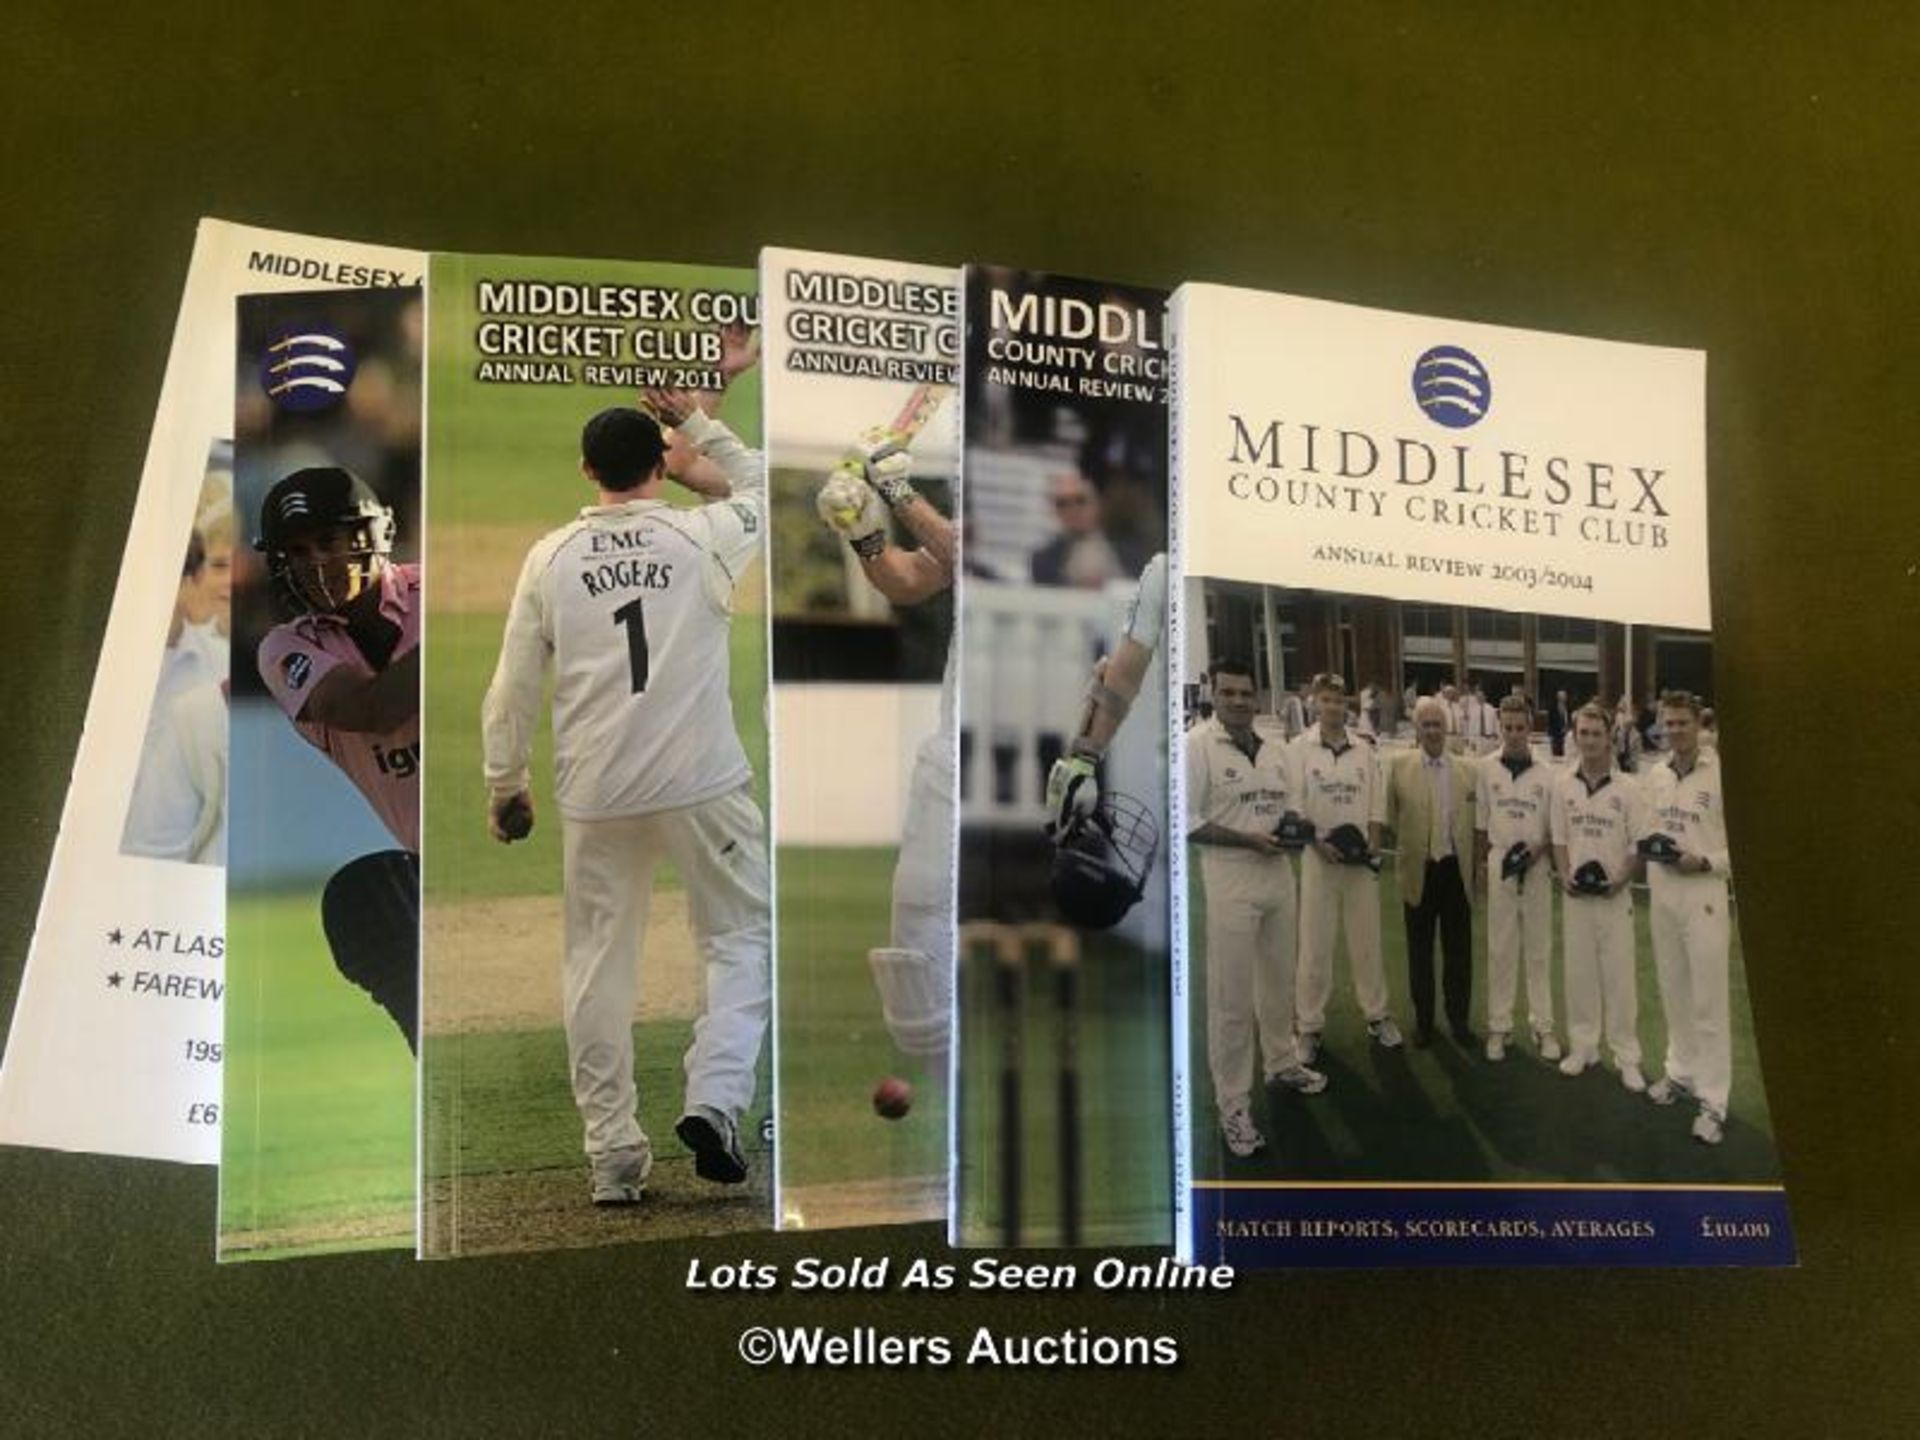 COLLECTION OF MIDDLESEX COUNTY CRICKET CLUB ANNUAL REVIEW BOOKS - 1992/93 AND 2004 TO 2013 - Image 2 of 2